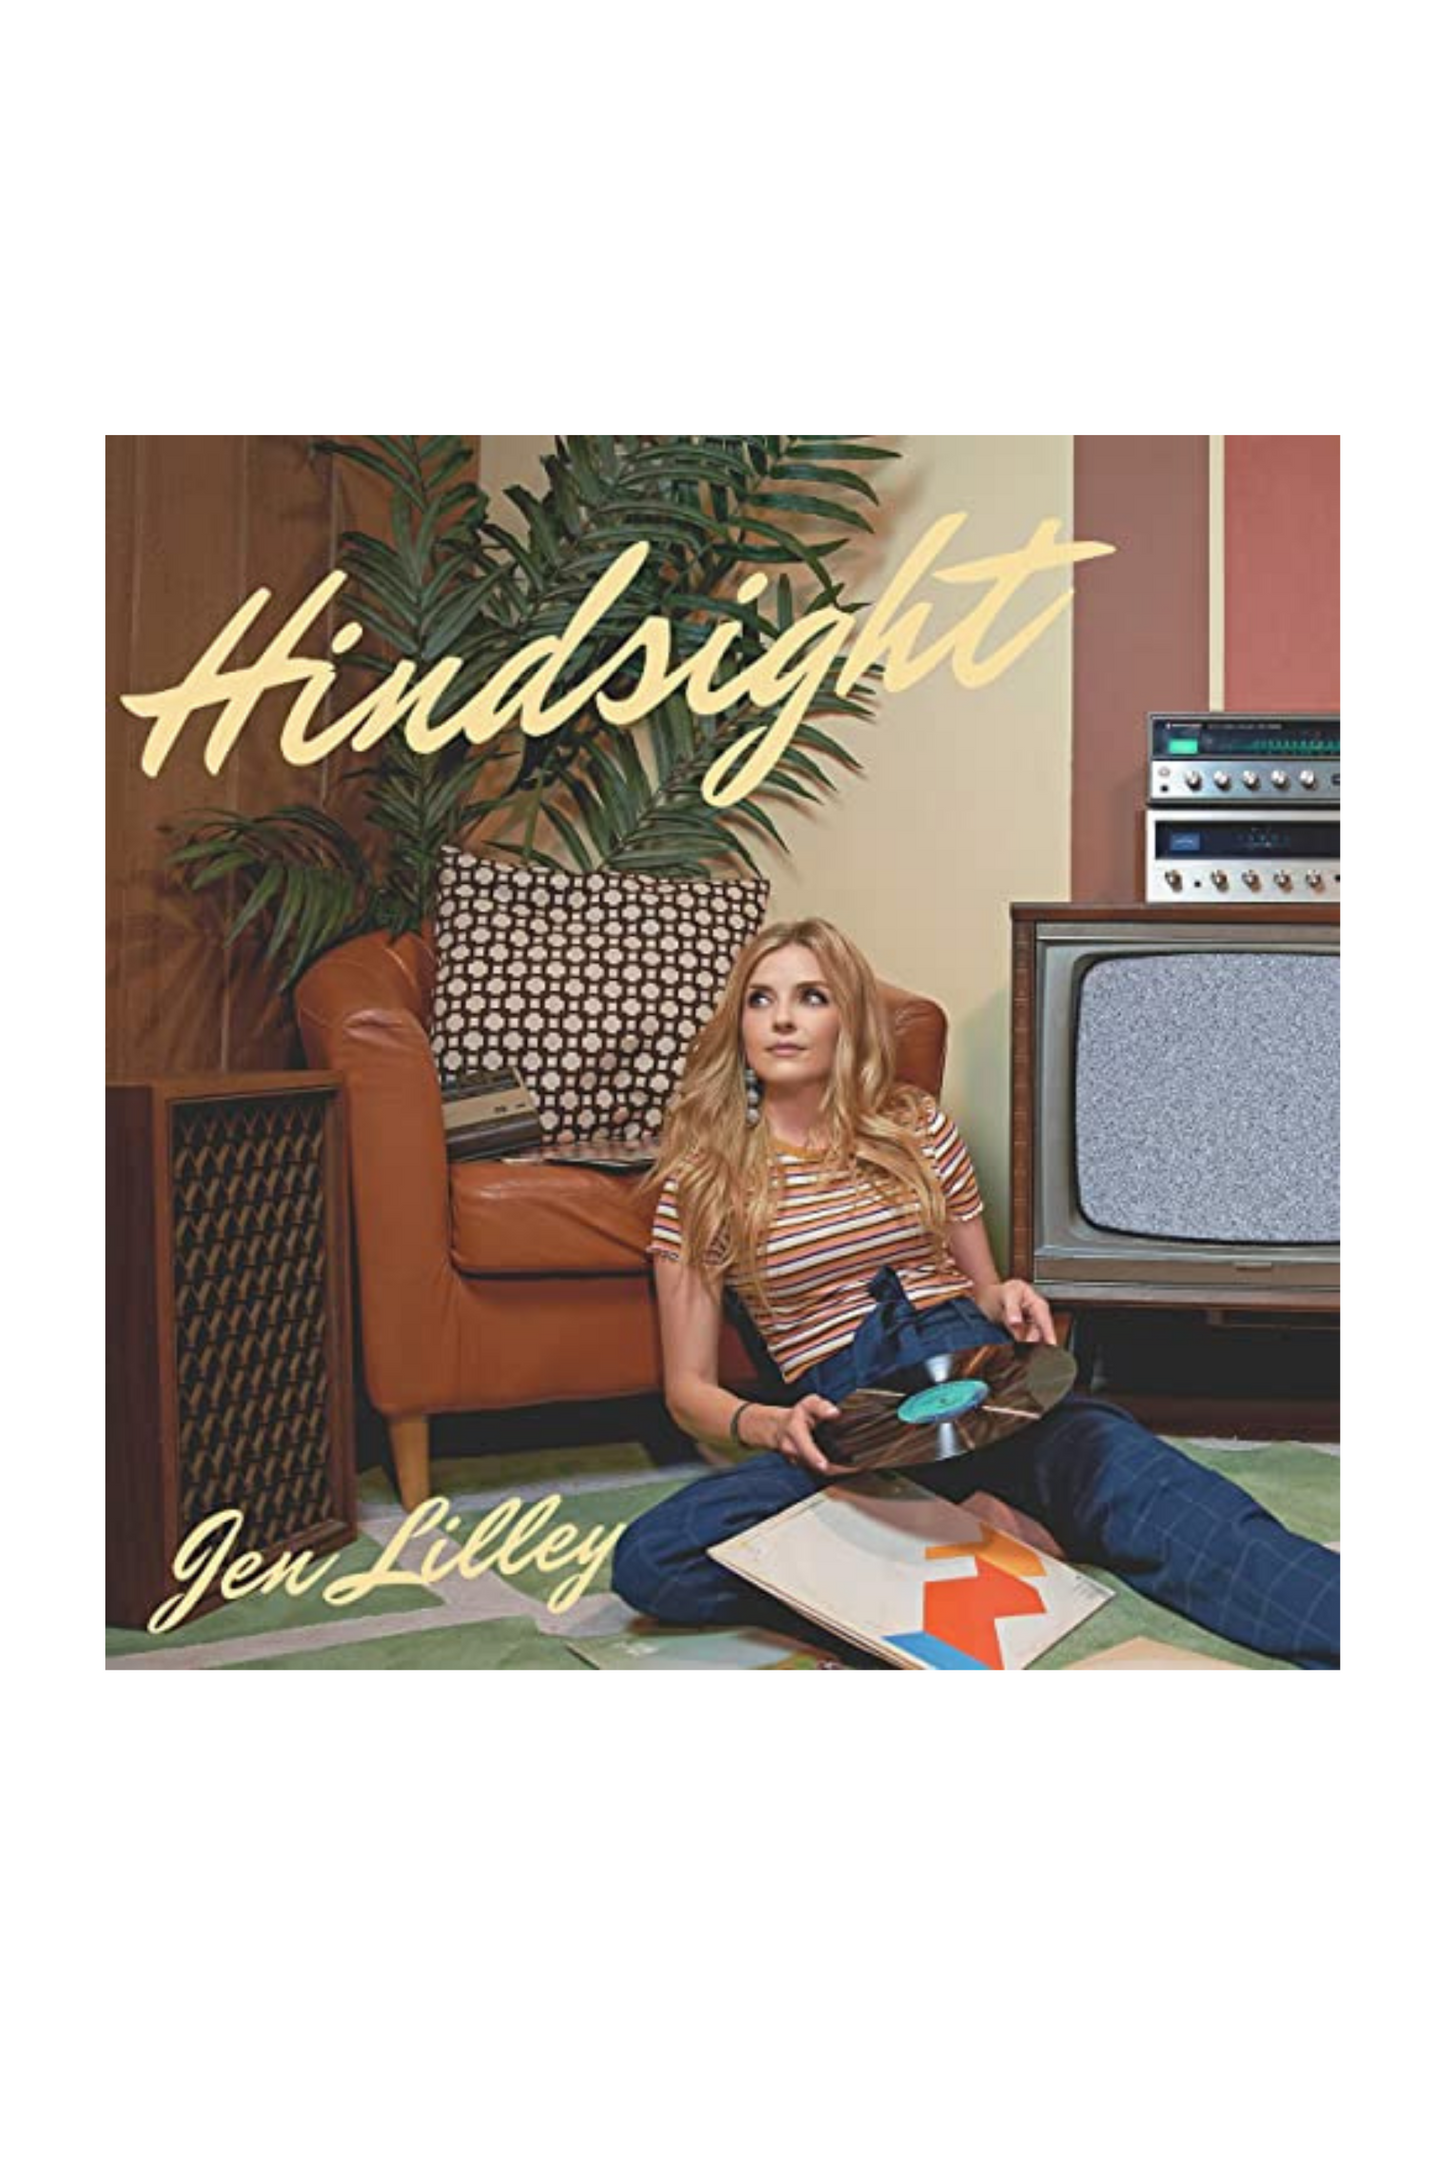 HINDSIGHT ALBUM by Jen Lilley